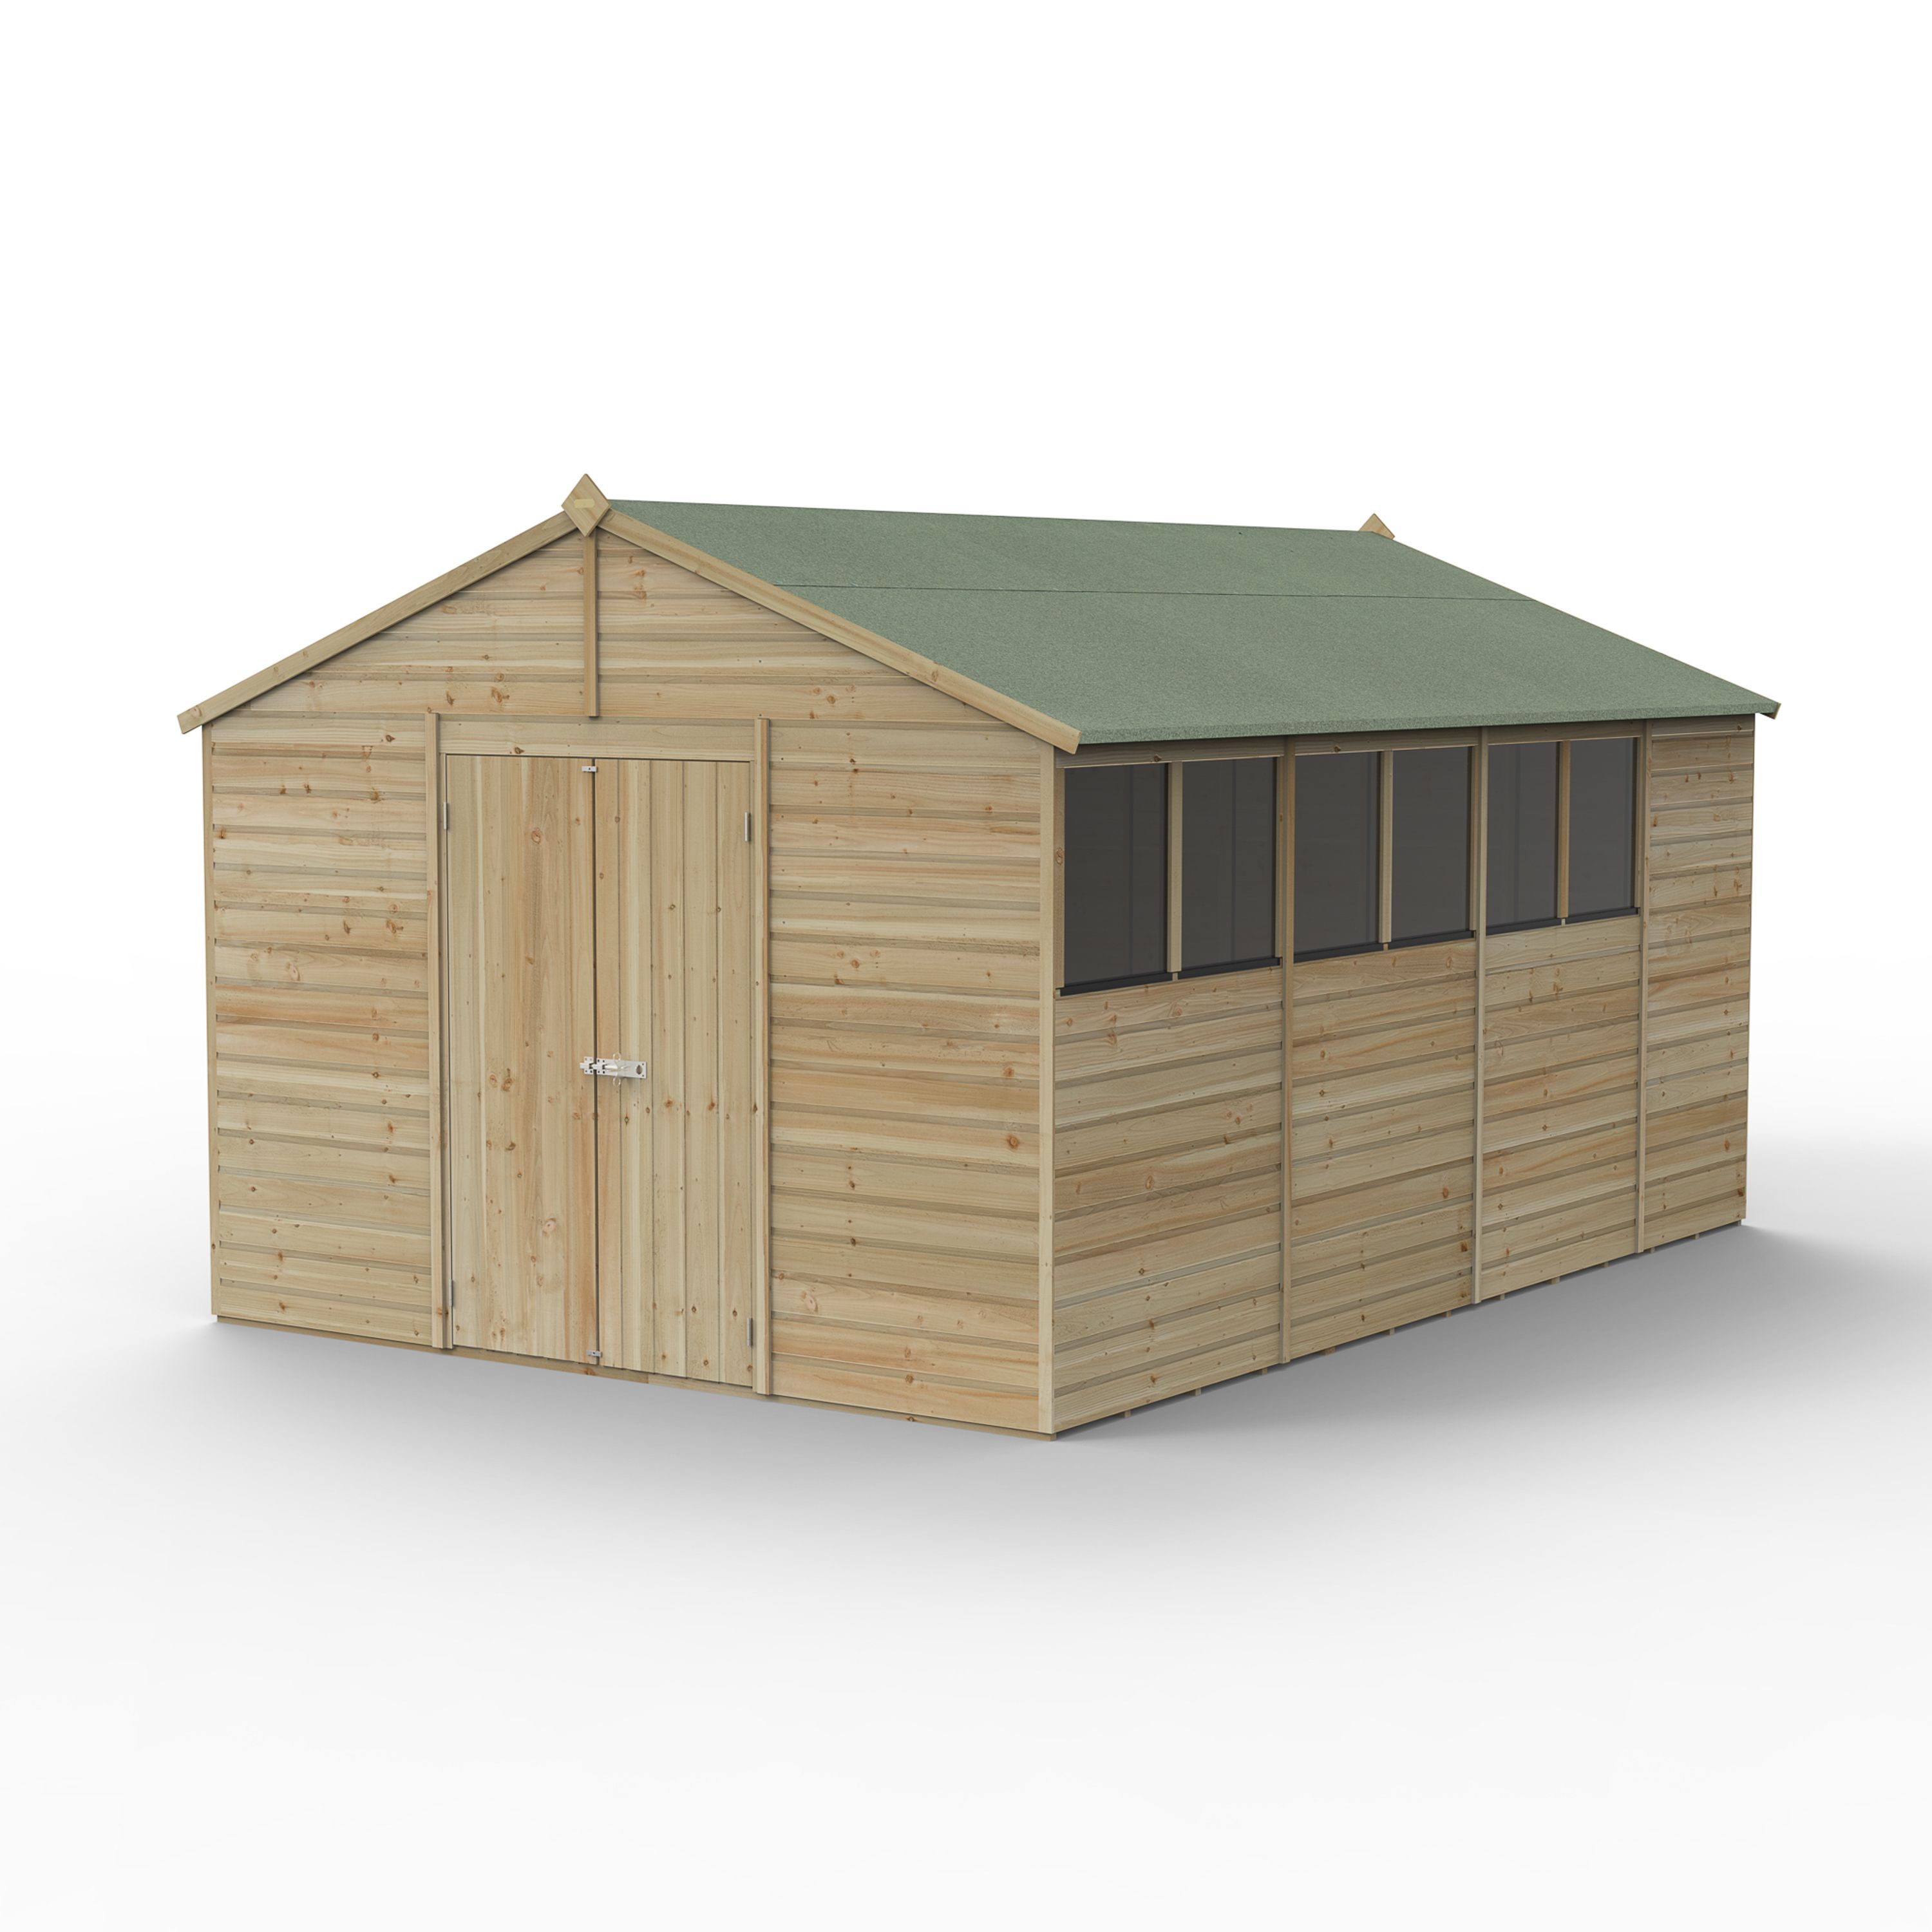 Forest Garden Beckwood 10x15 ft Apex Natural timber Wooden 2 door Shed with floor & 6 windows (Base included) - Assembly not required